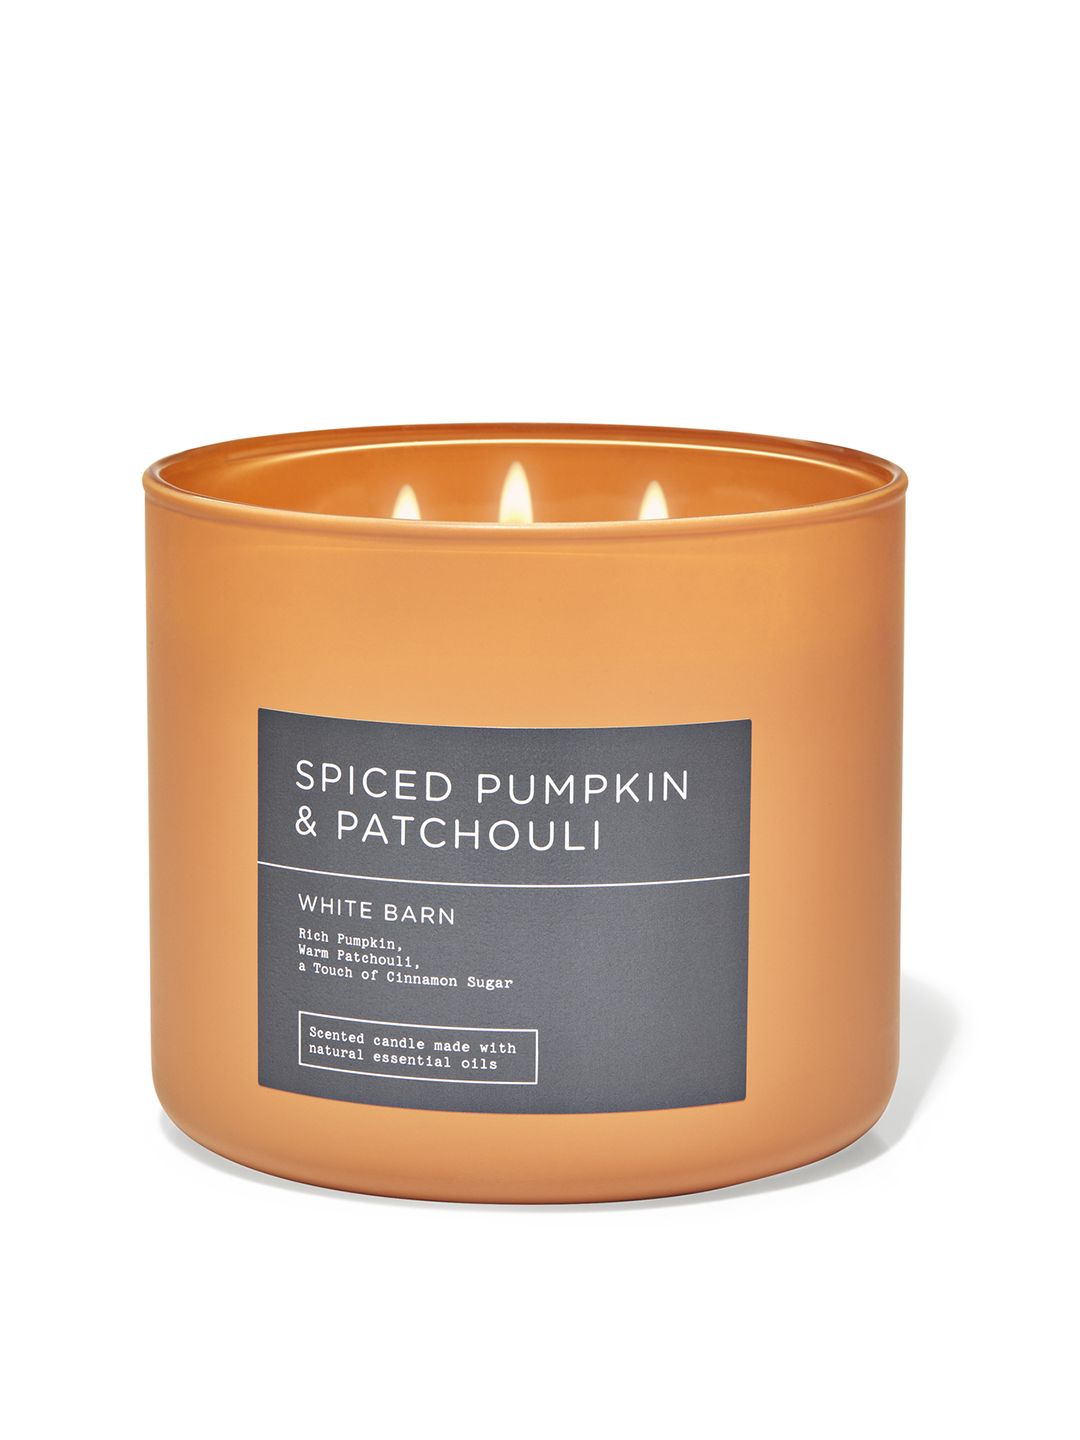 Bath & Body Works Spiced Pumpkin & Patchouli 3-Wick Scented Candle - 411g Price in India